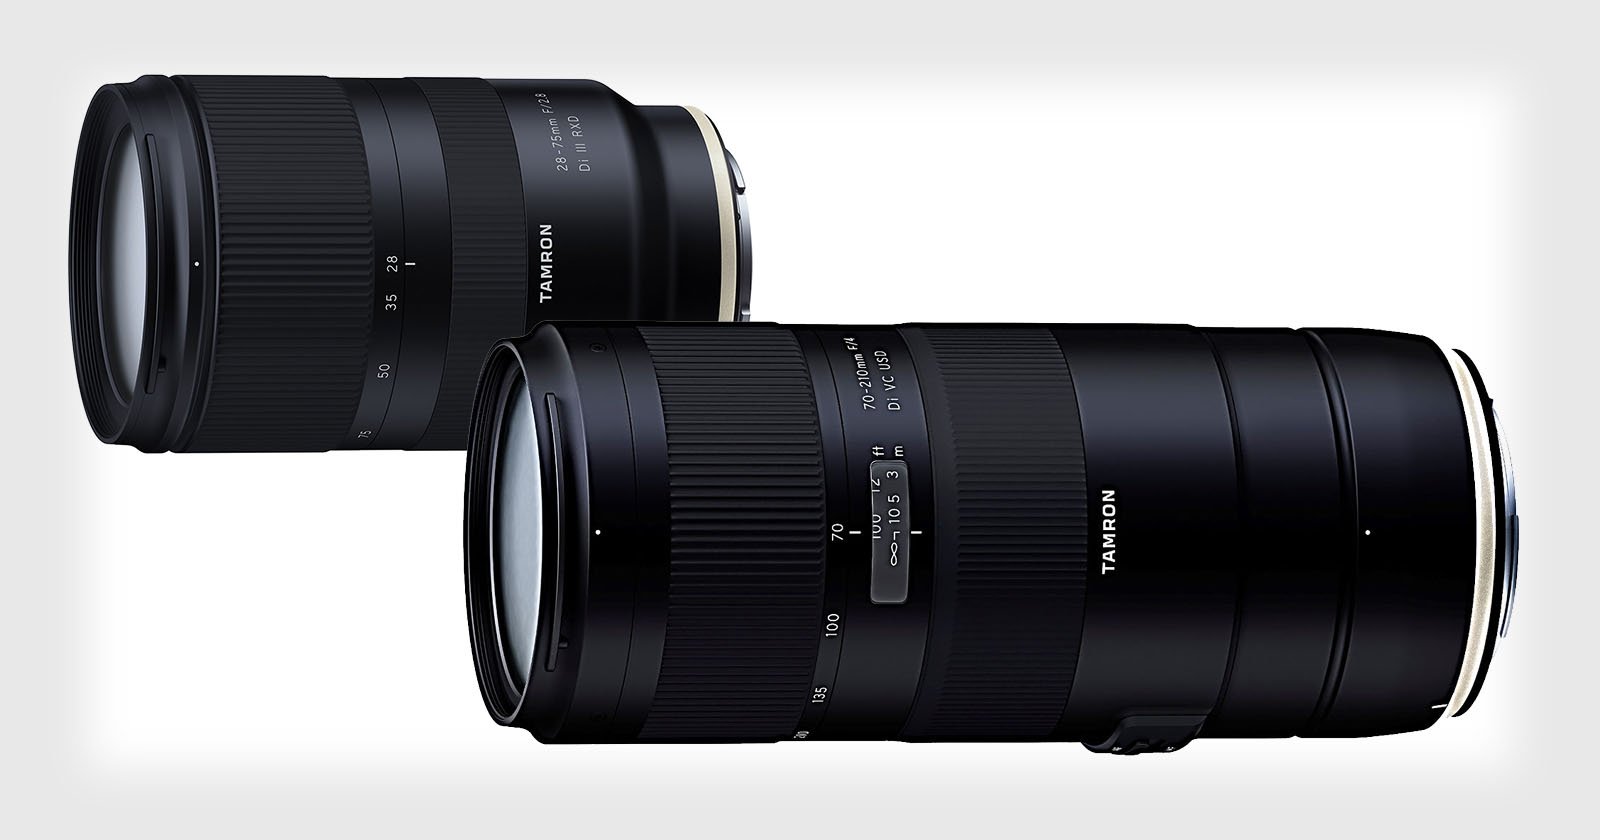 Tamron 28-75mm f/2.8 Di III RXD FE Compared to The Sony Zeiss 24-70mm f/4  Vario-Tessar T FE OSS - Sony Addict